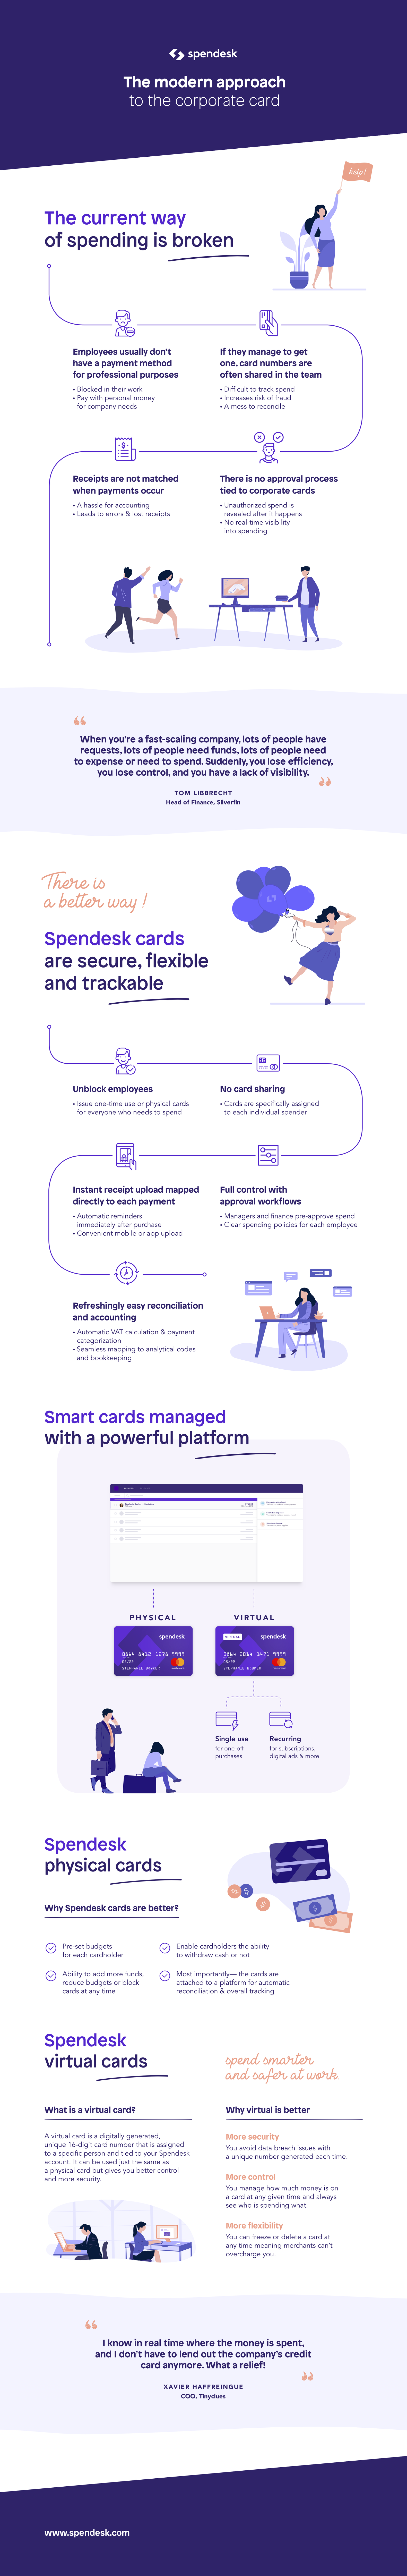 Spendesk Virtual Cards Infographic 2